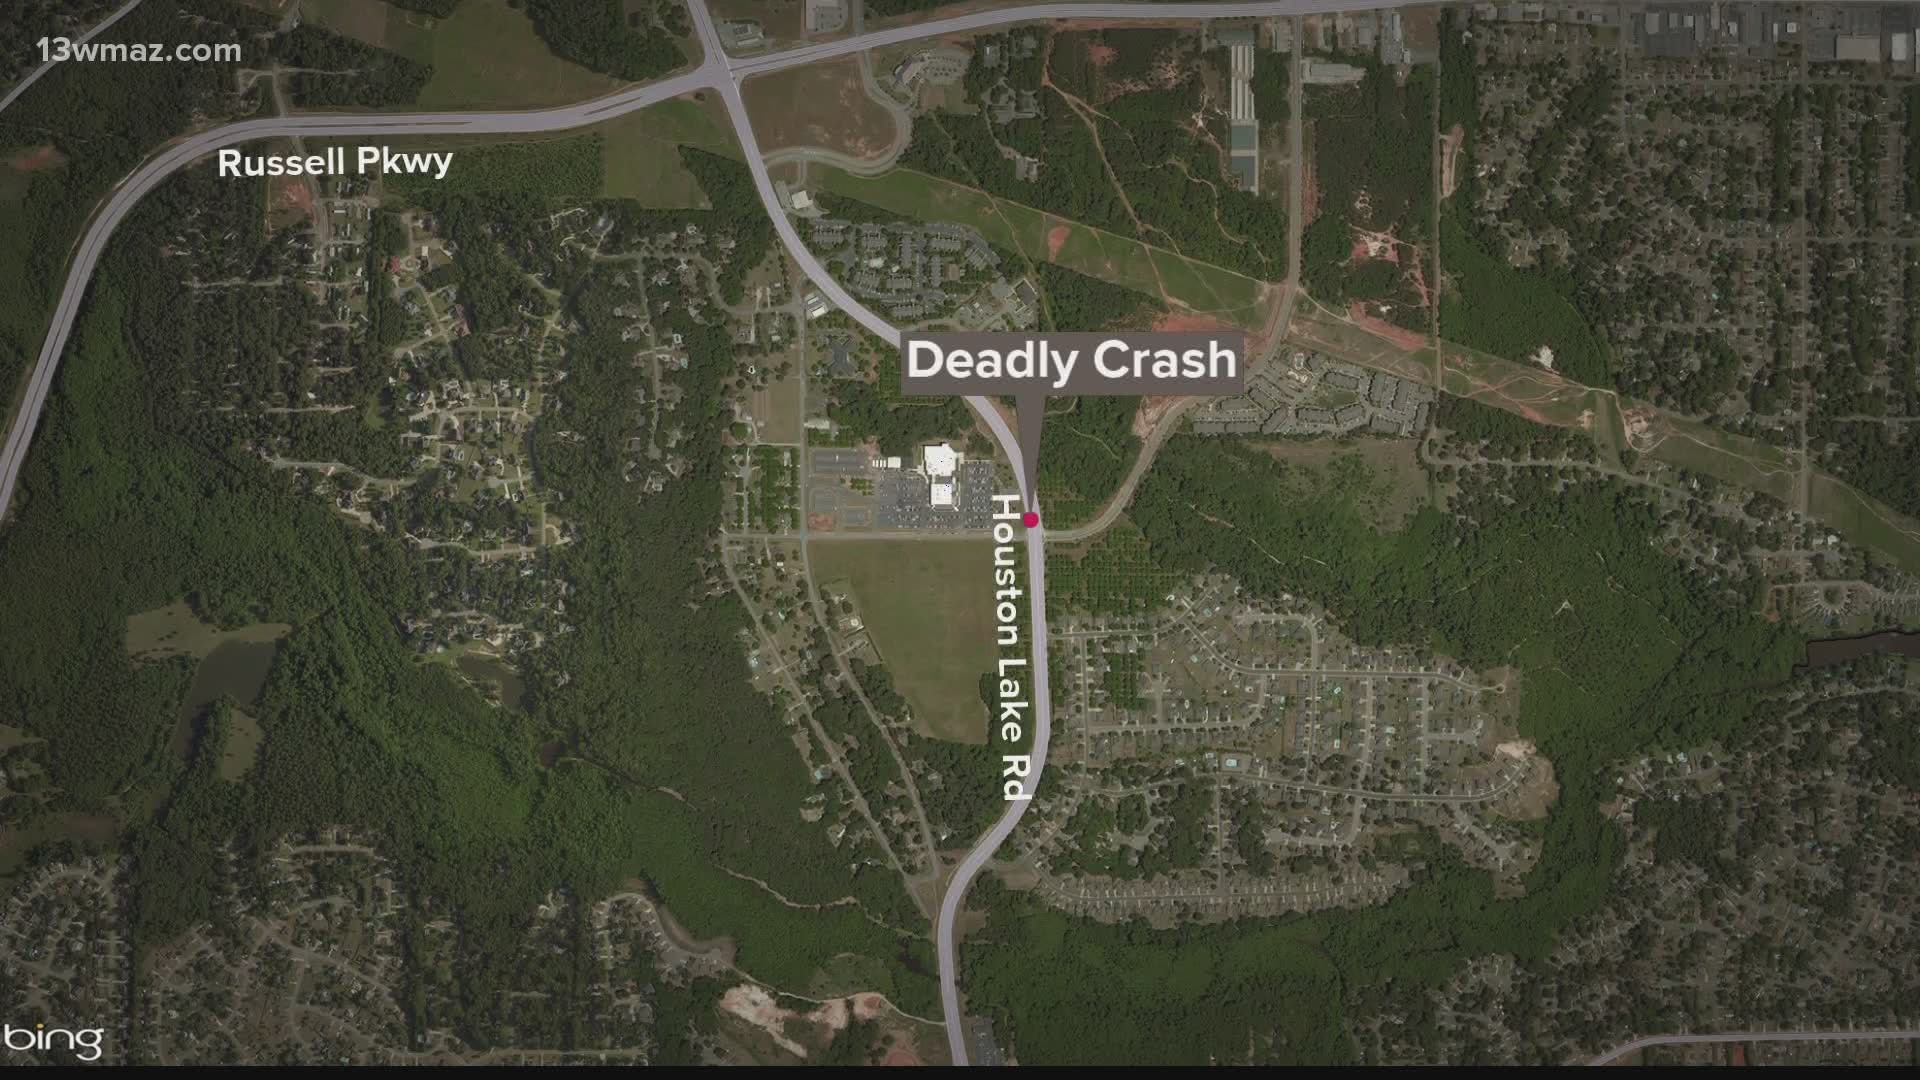 Police say a 26-year-old Americus man was pronounced dead at the scene of the wreck